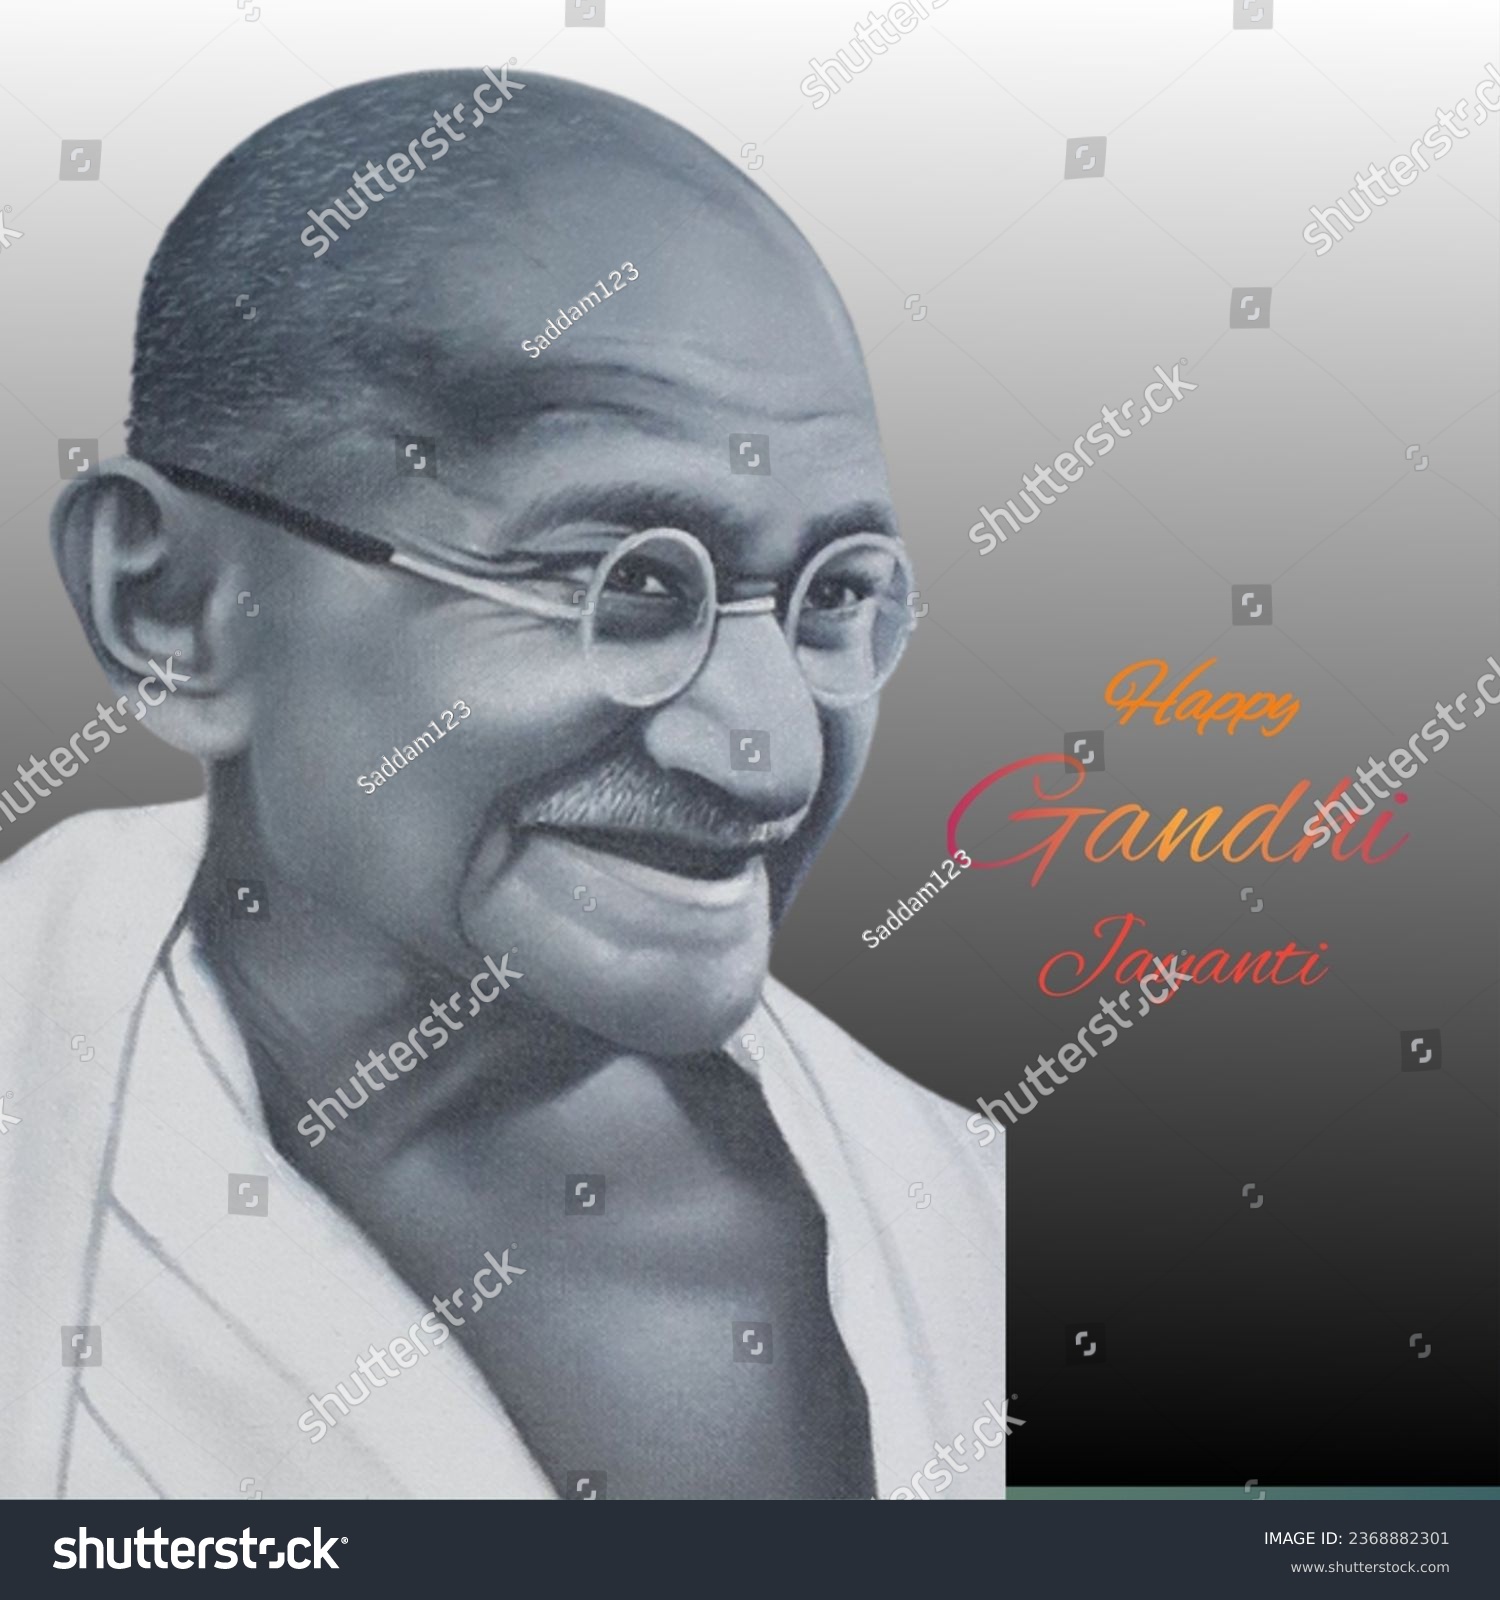 Happy Gandhi jayanti nice and beautiful pictures  #2368882301